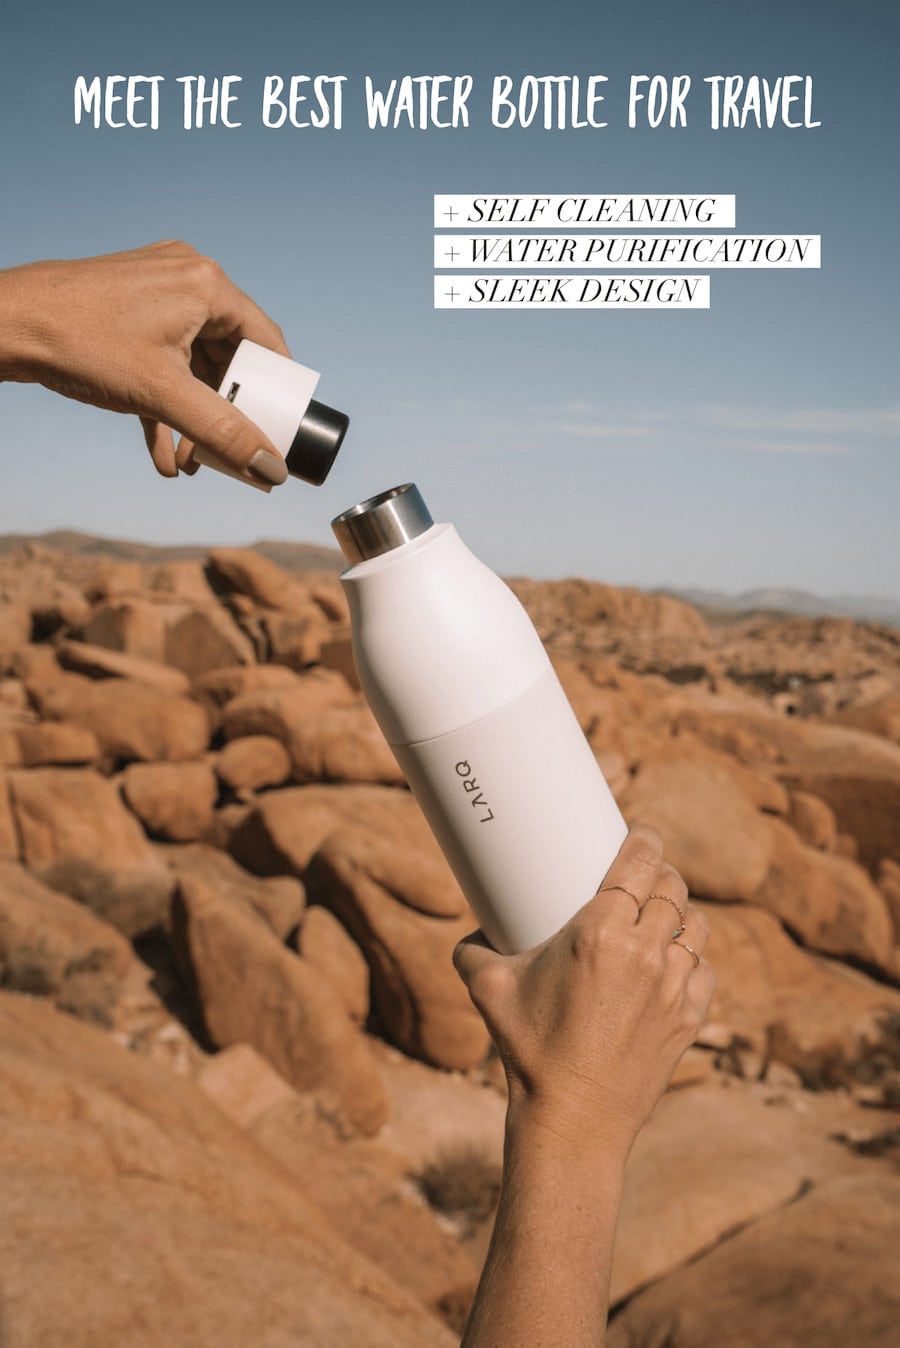 The Best Water Bottle For Travel That Cleans Itself!